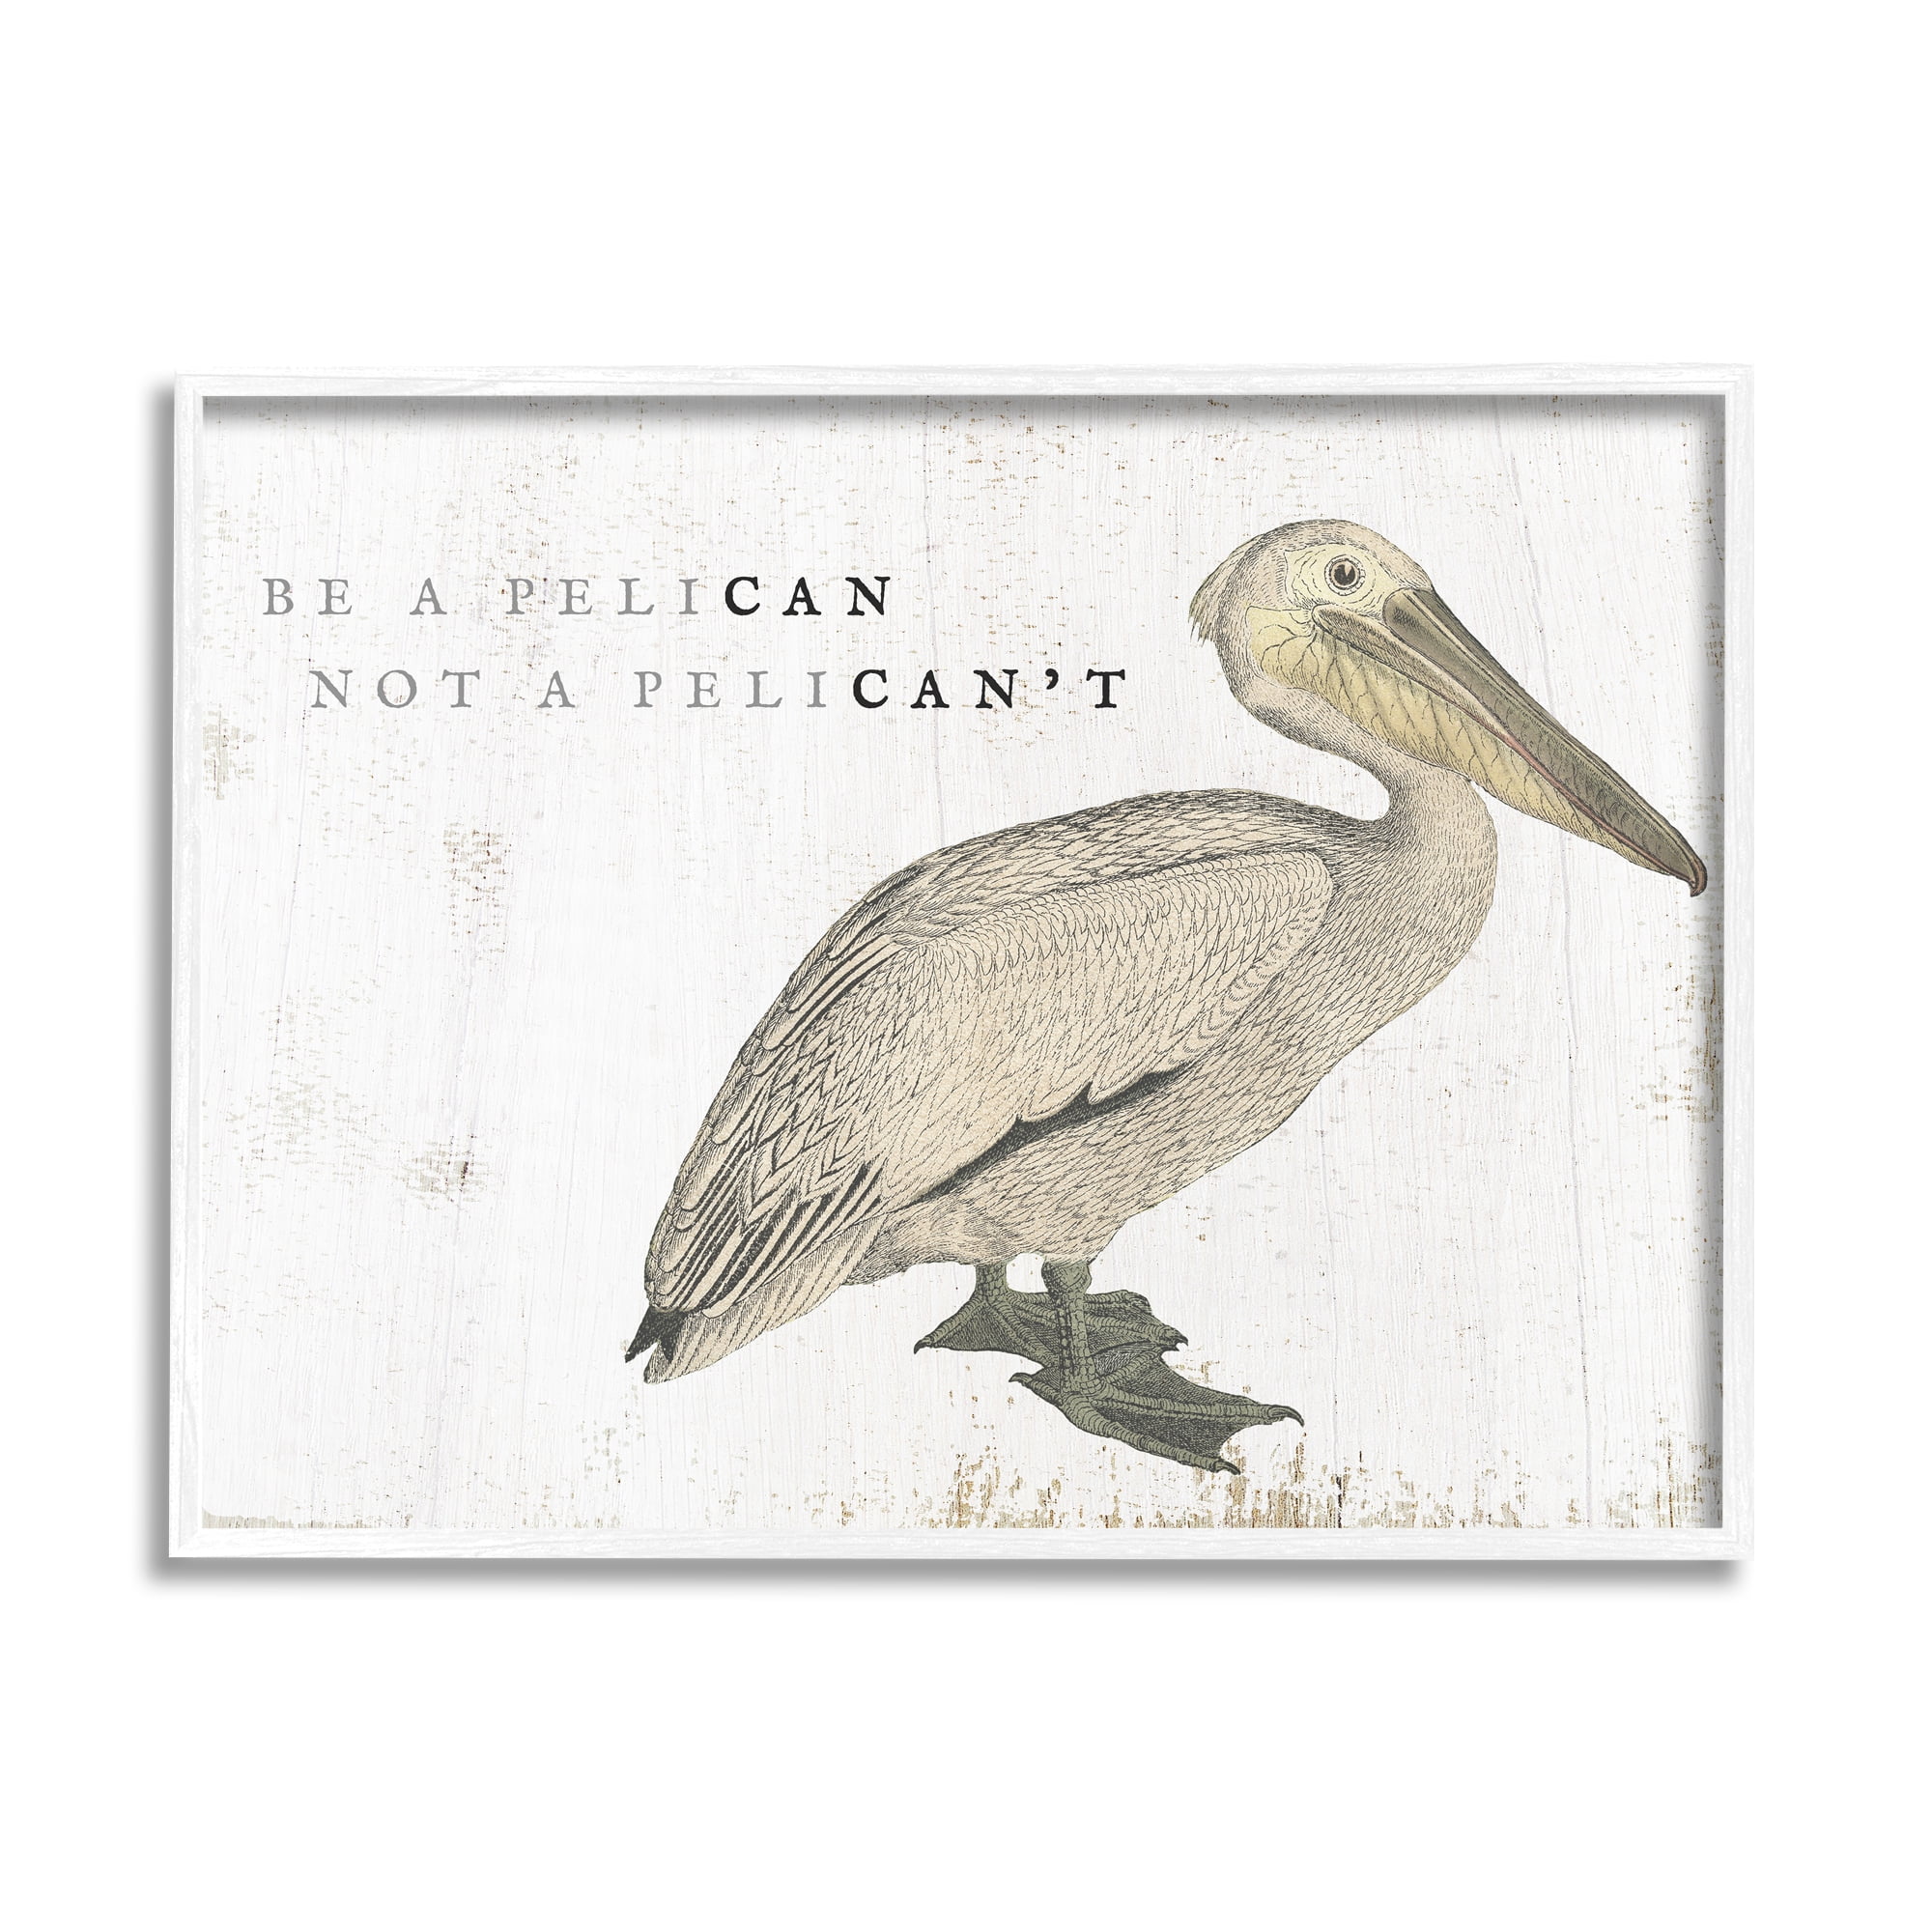 Stupell Industries Be Pelican not Pelican't Funny Beach Phrase Pun Graphic  Art White Framed Art Print Wall Art, 20x16, by Daphne Polselli 